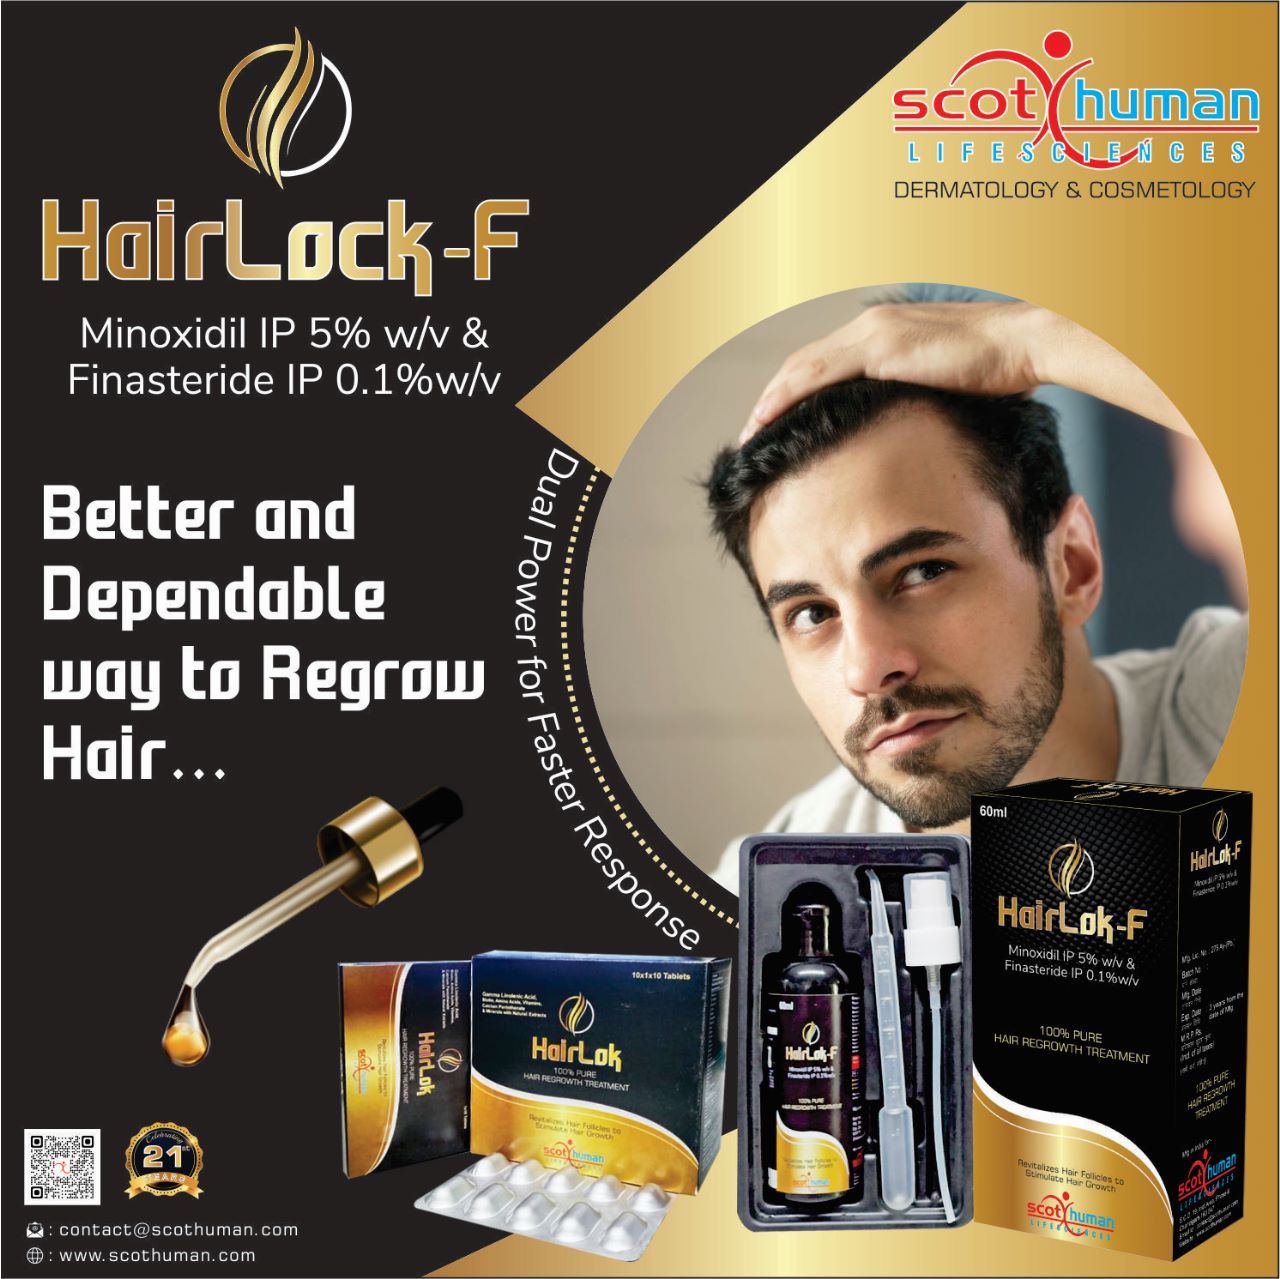 Product Name: Hairlock  F, Compositions of Hairlock  F are Minoxidil IP w/v and Finasteride IP 0.1% w/v - Pharma Drugs and Chemicals